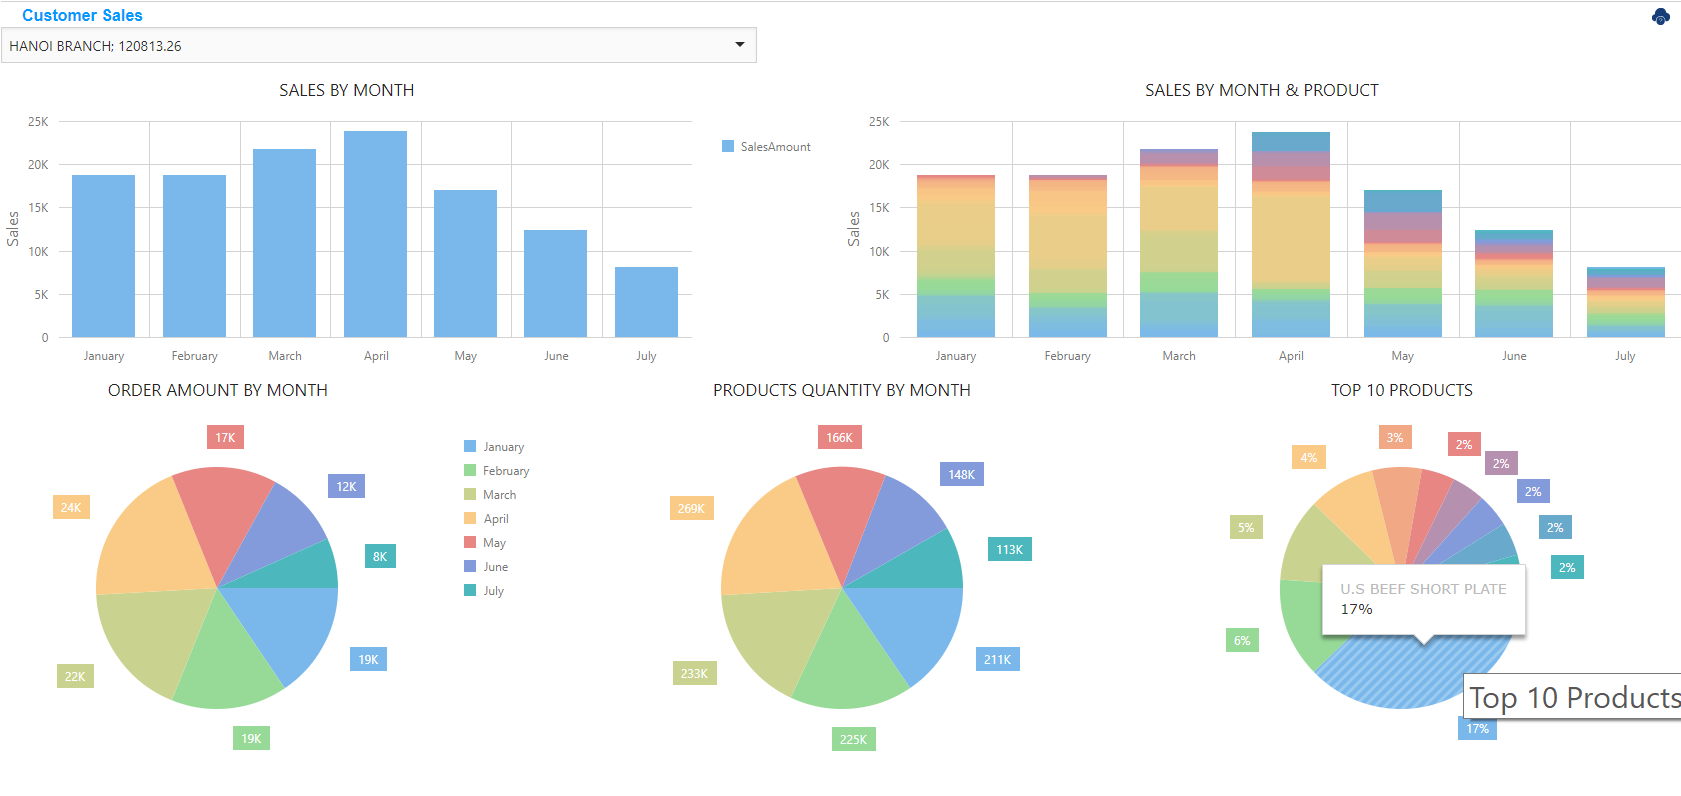 1.CRM &gt; Companies and Contacts | Companies List | Sale Customers Reports : This feature analyses the sales of the selected customers. 
1. Sales by month
2. Sales by product
3. Orders by month
4. Top Products. 
It allows the sales rep to understand the sales trends, products that contribute to the majority of sales, sales trend with time.